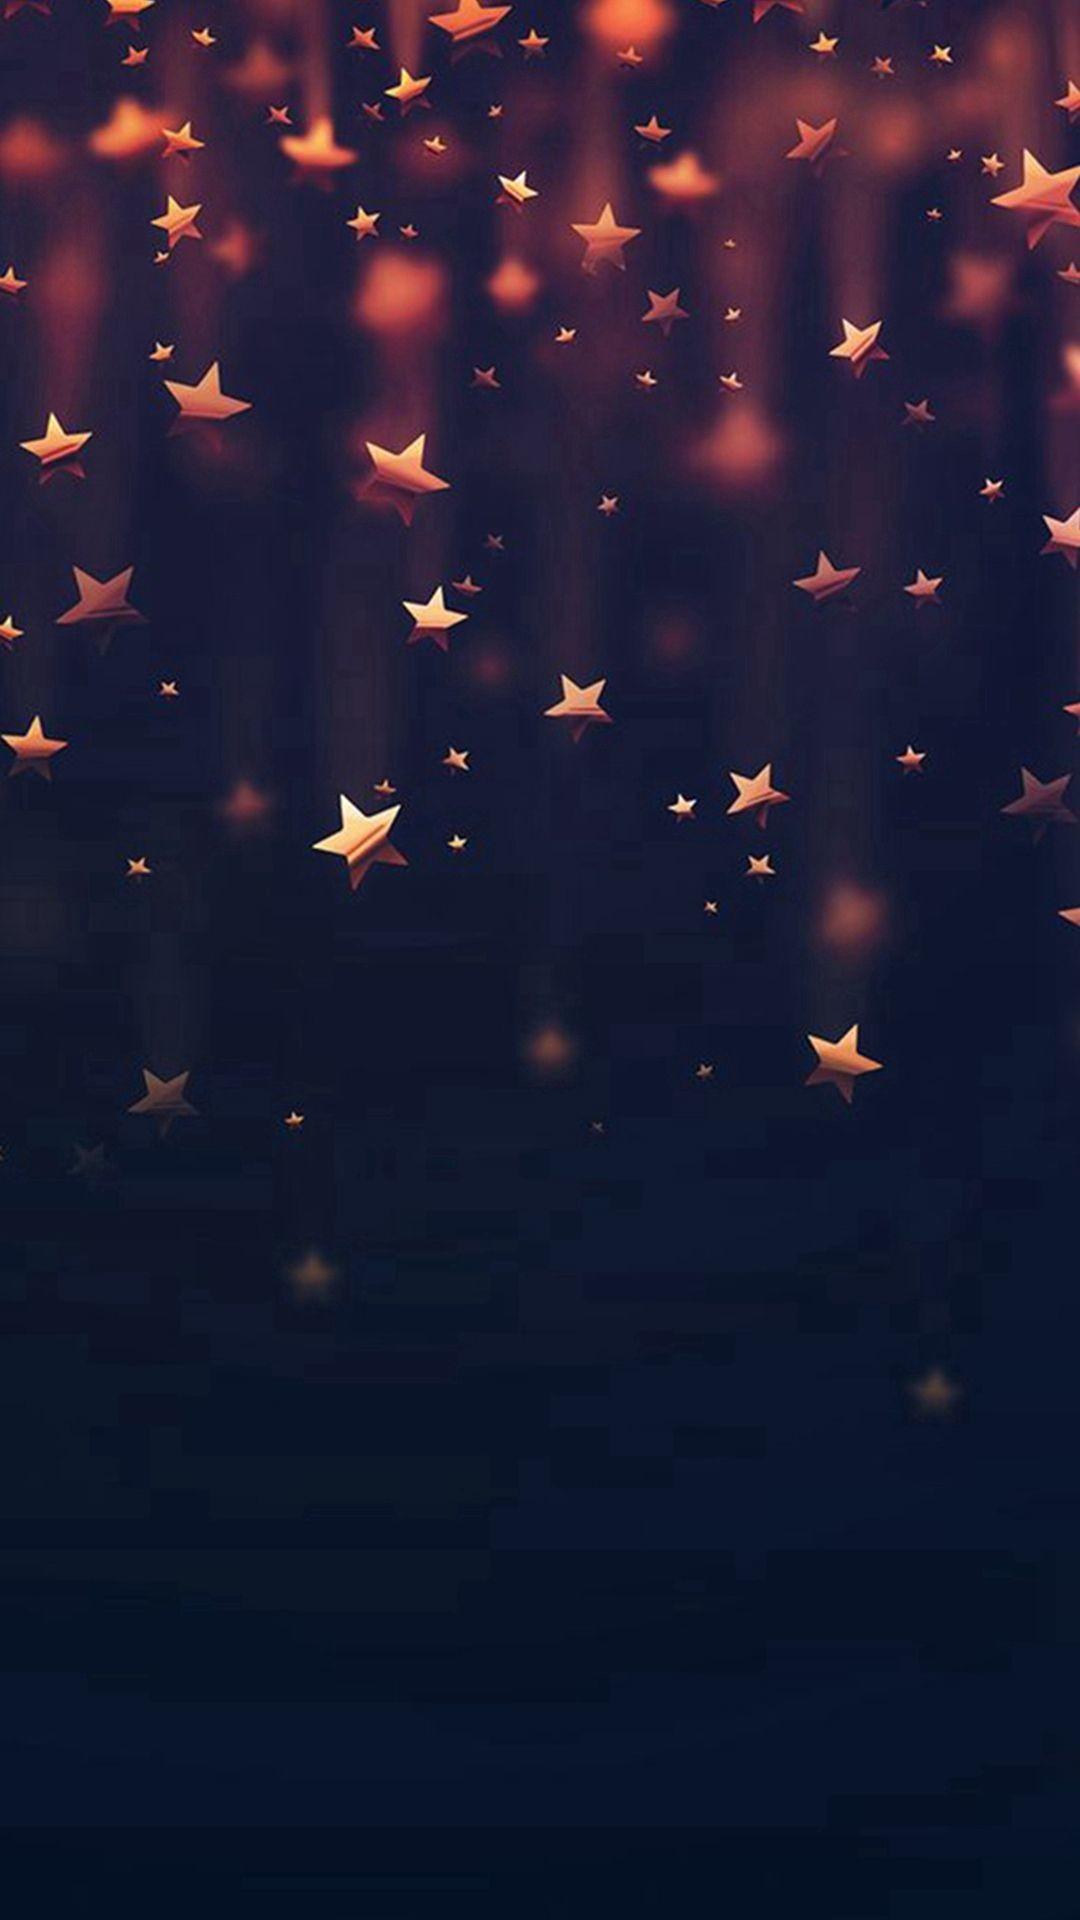 Shooting Star Wallpaper background picture